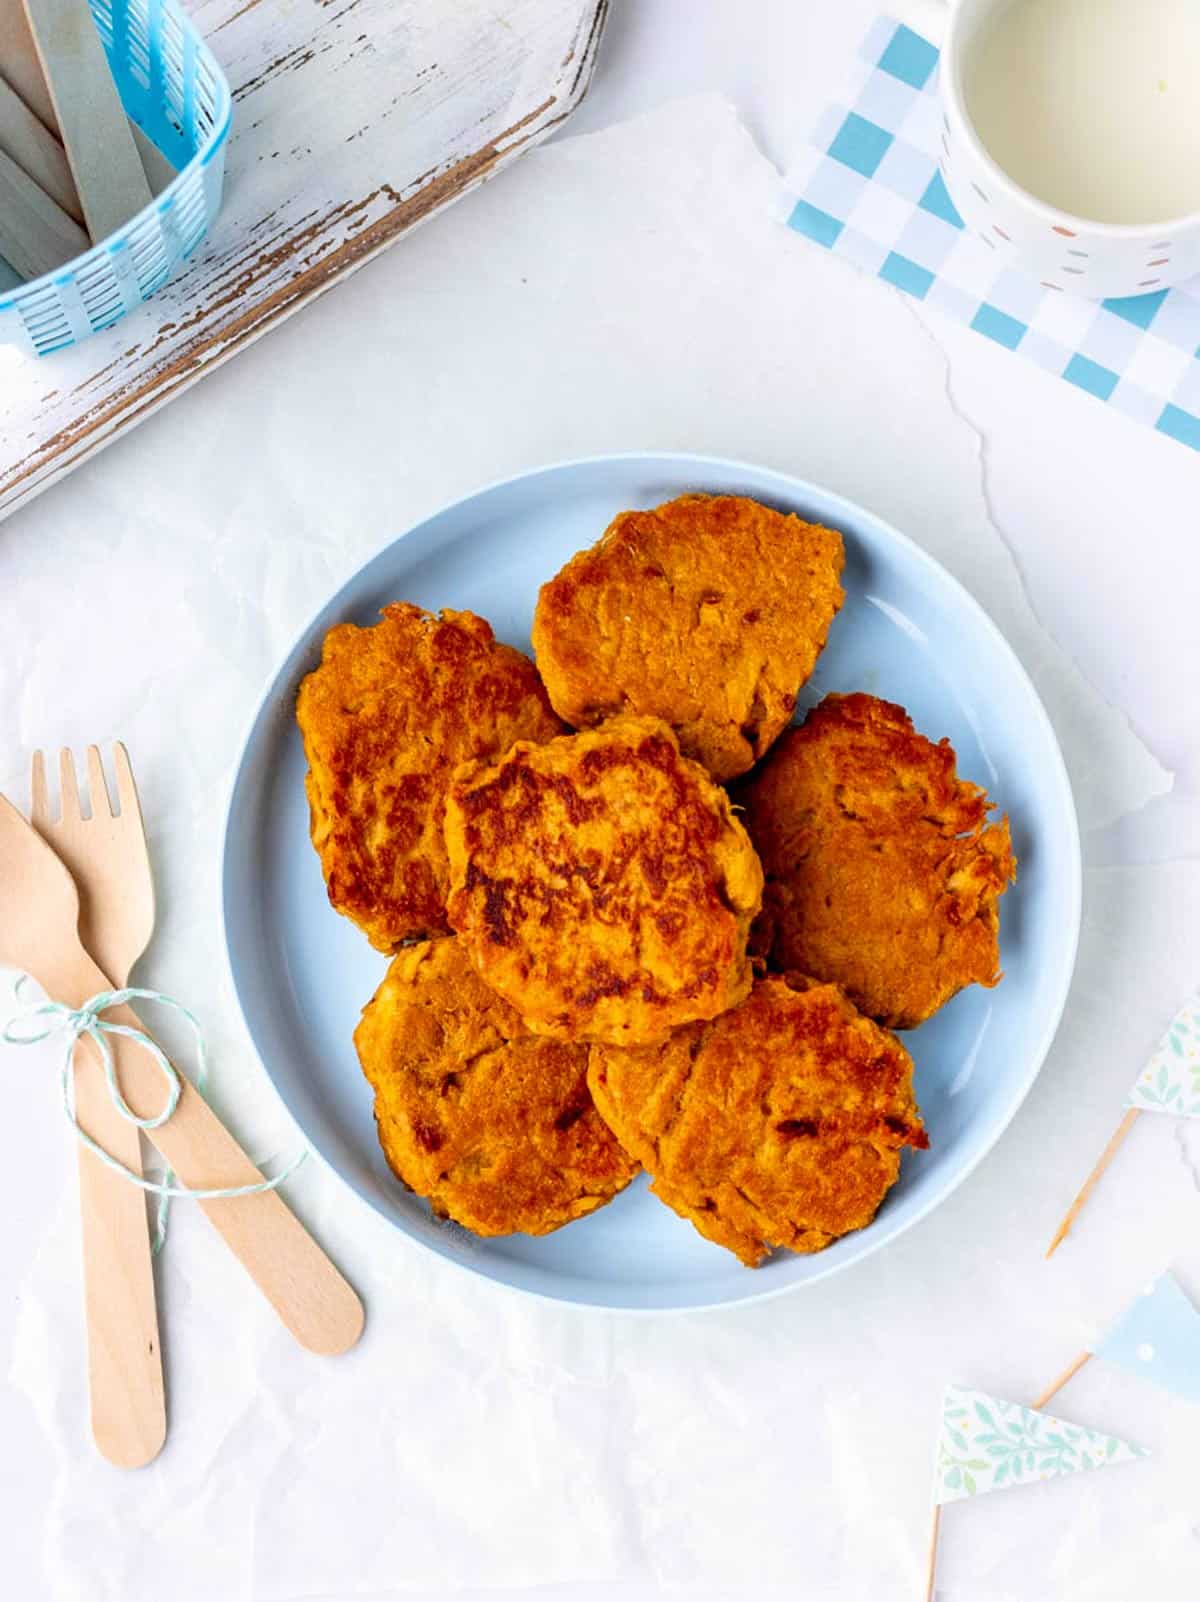 A plate of sweet potato patties next to some forks.